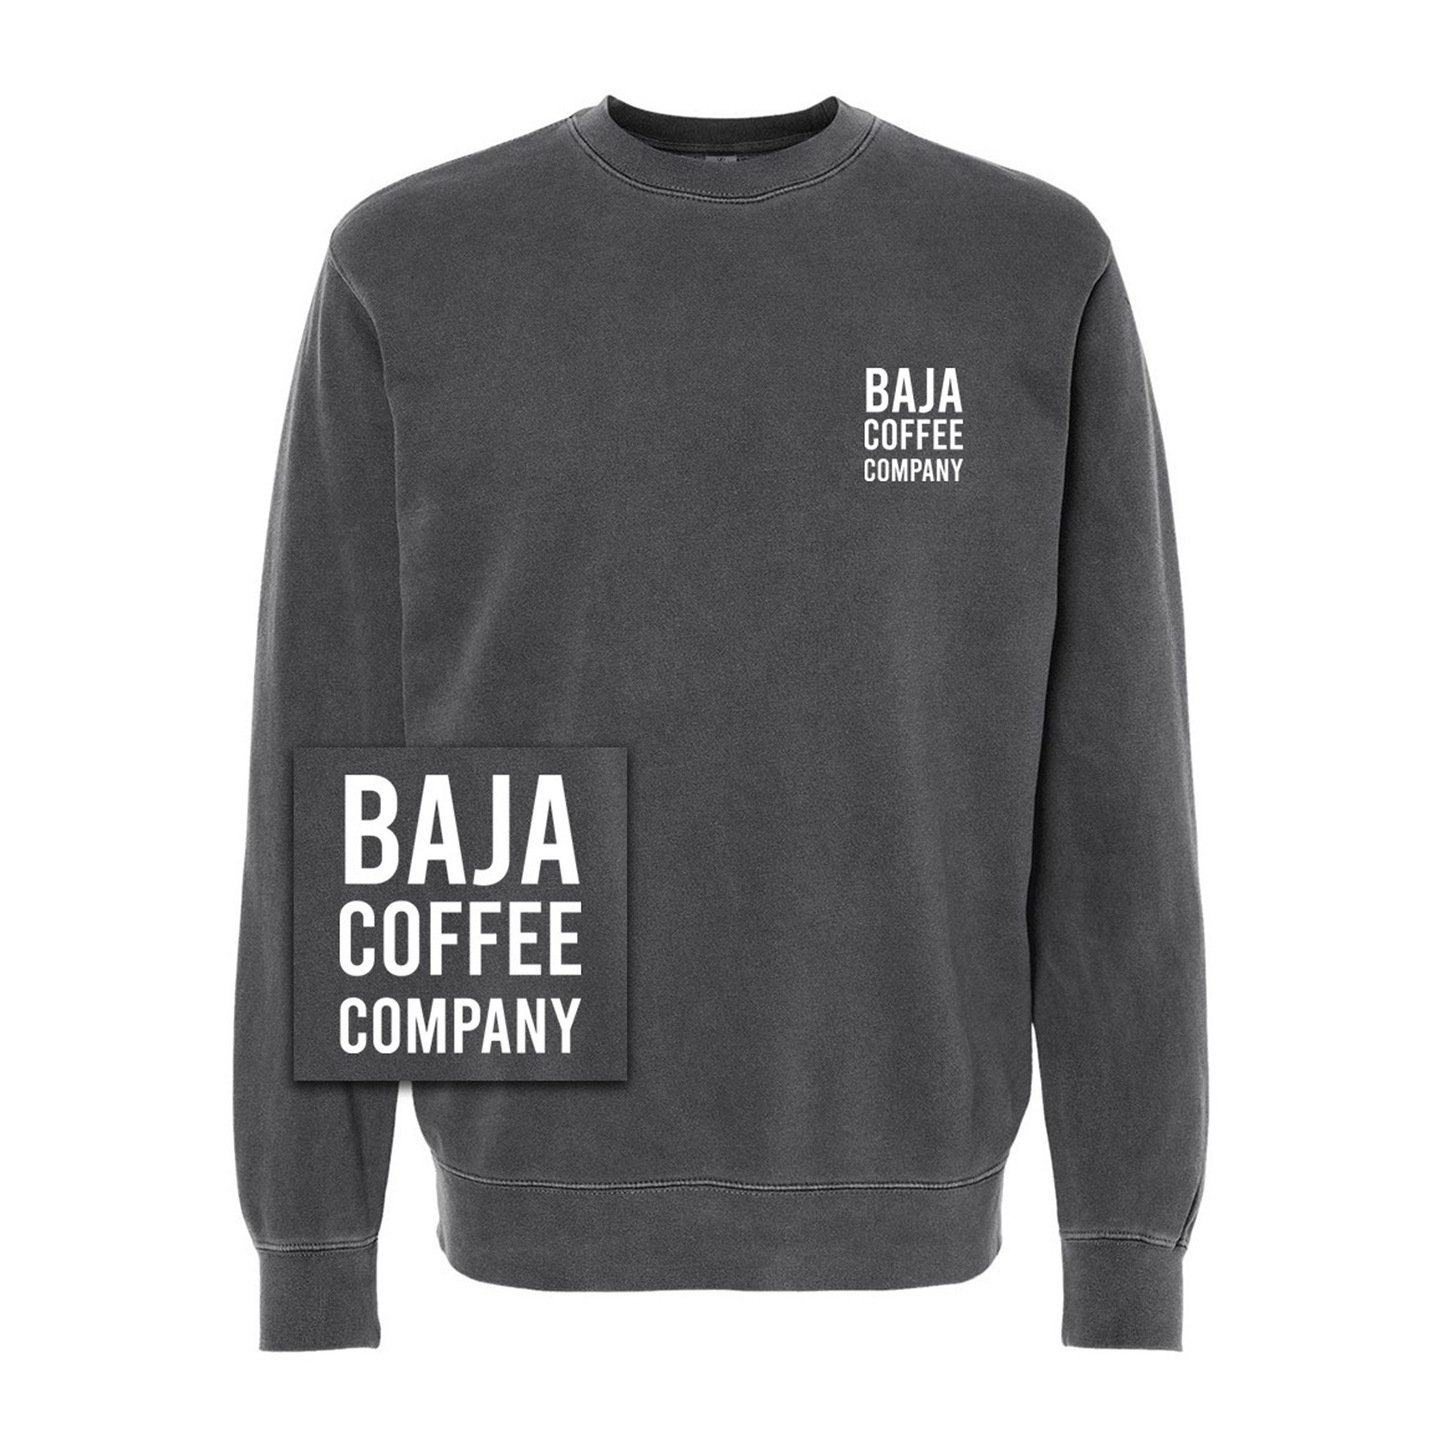 Baja Coffee Company (White, Stacked, Pocket) & Grayscale Emblem (Back) - Independent Trading Co. - Midweight Pigment-Dyed Crewneck Sweatshirt - PRM3500 (Pigment Black)